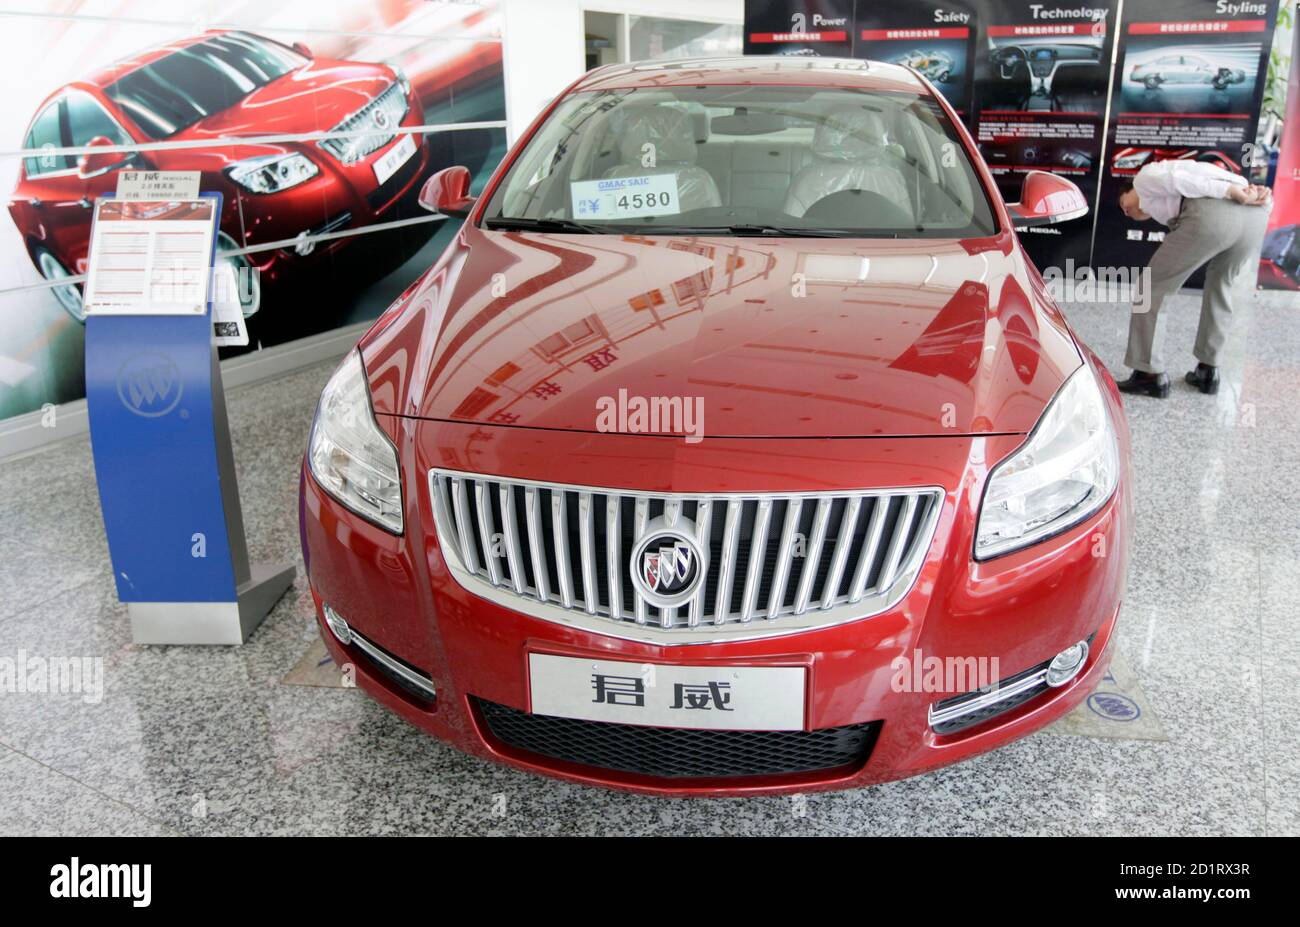 A customer looks at a Buick Regal car at a General Motors auto dealership in Shanghai May 29, 2009. GM is facing imminent bankruptcy in the United States after bondholders rejected a debt-for-equity swap, a key part of the restructuring plan it needs to complete before a June 1 deadline imposed by the administration of President Barack Obama. Its China division, primarily two ventures with SAIC Motor, is profitable and self-sufficient, and able to fund its own daily operations and expansion, executives say. REUTERS/Aly Song (CHINA TRANSPORT BUSINESS) Stock Photo